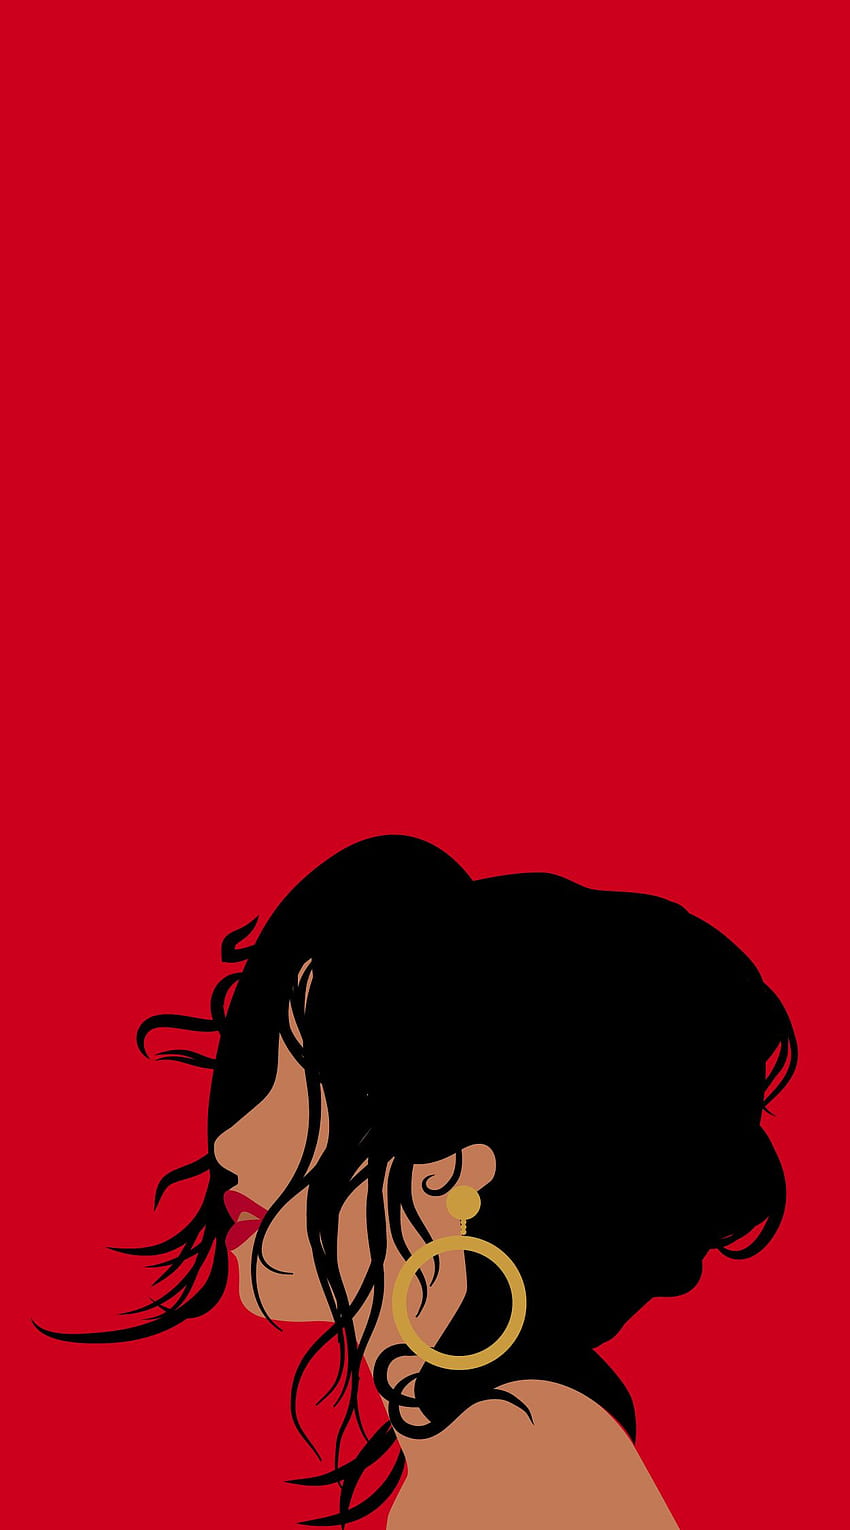 This is an illustration of Camila Cabello's single cover for Havana which I loved. The actual cover features and pictur…, easy camila cabello HD phone wallpaper